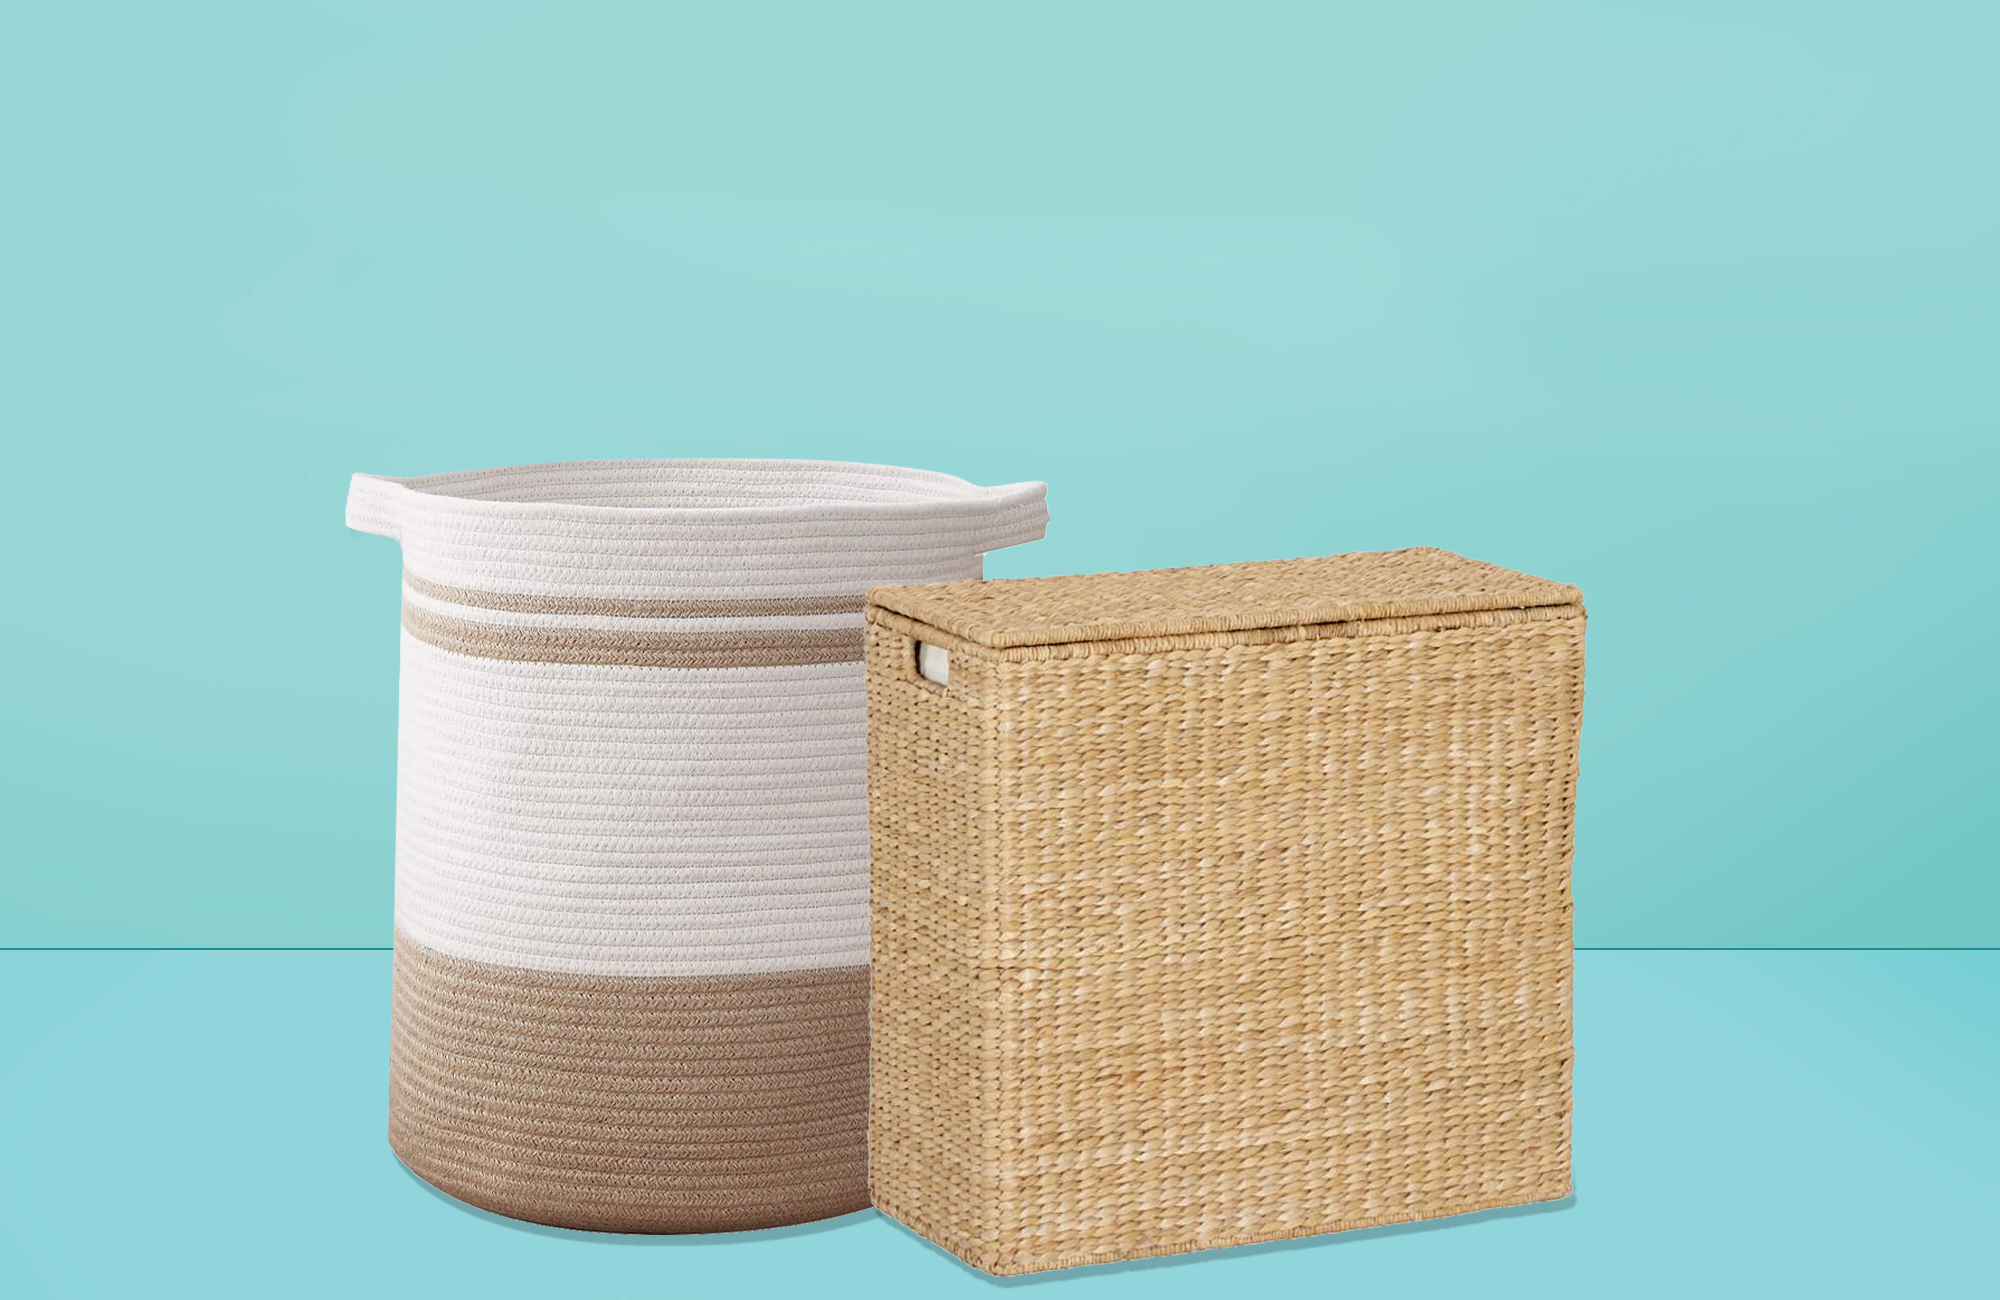 The 6 Best Laundry Baskets and Hampers of 2023